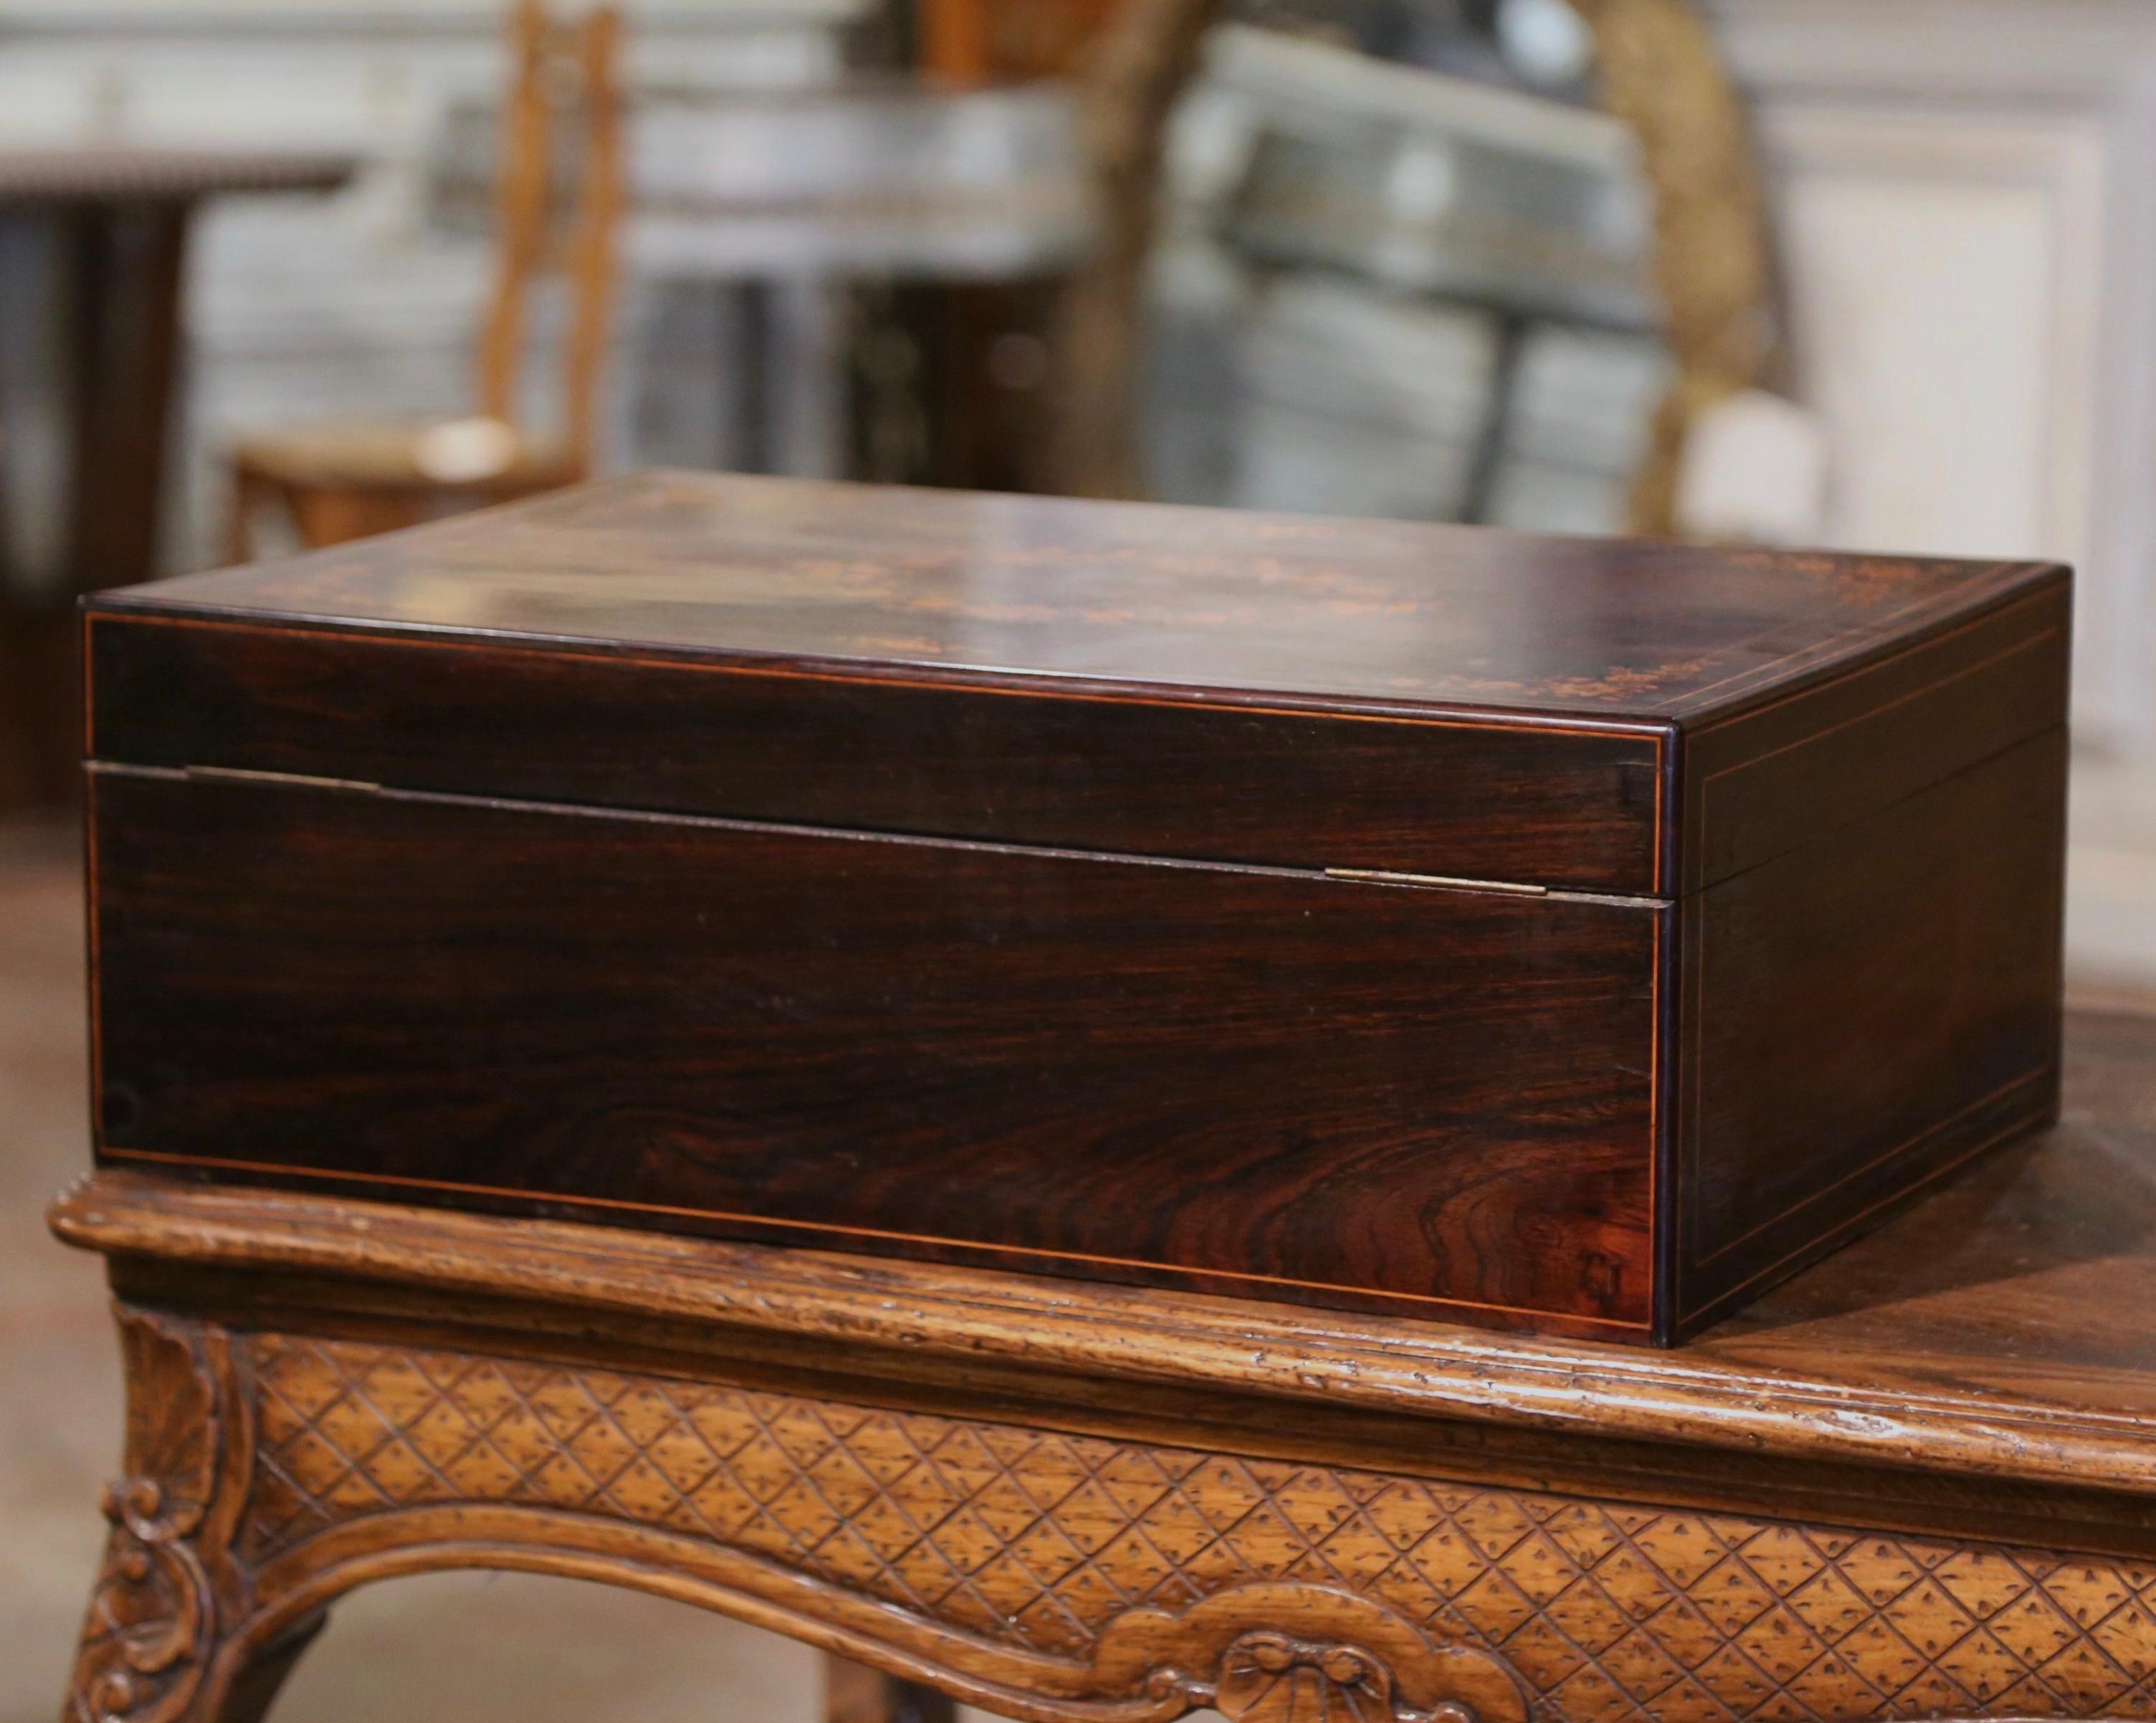 19th Century French Napoleon III Floral Inlaid Rosewood Decorative Jewelry Box For Sale 7